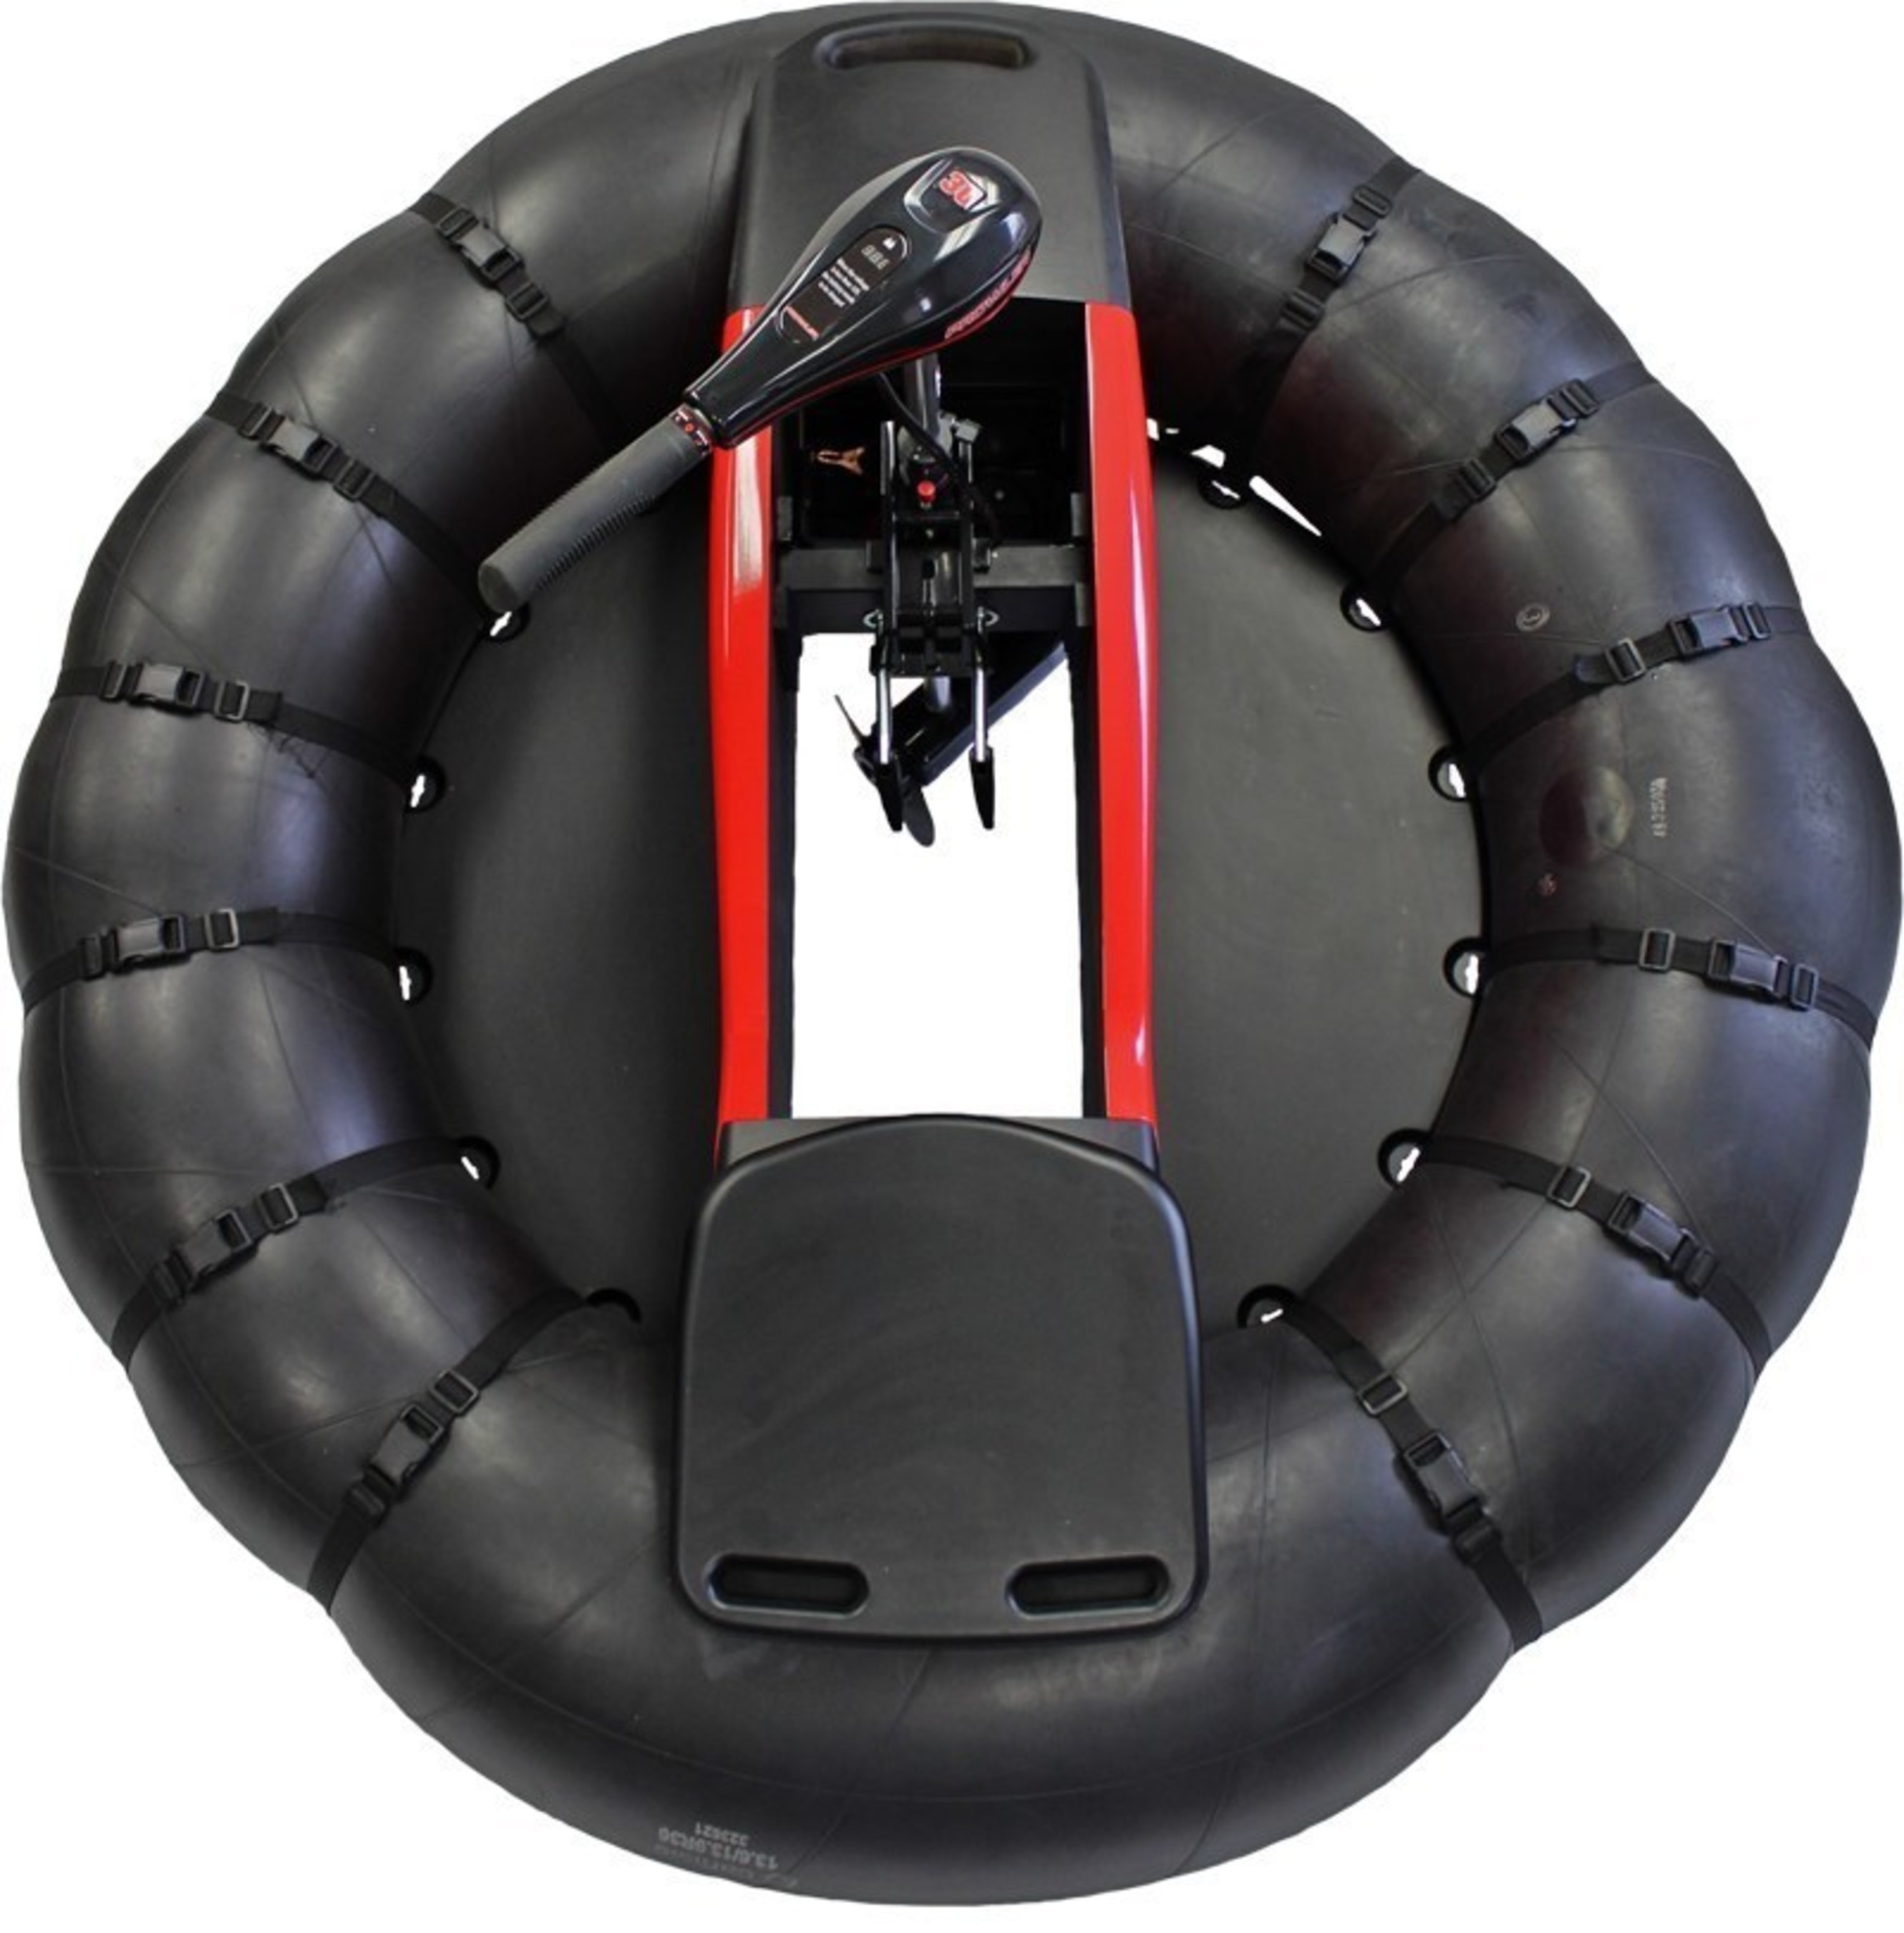 The GoBoat snaps together in minutes. Just add a trolling motor to go anywhere on the water.